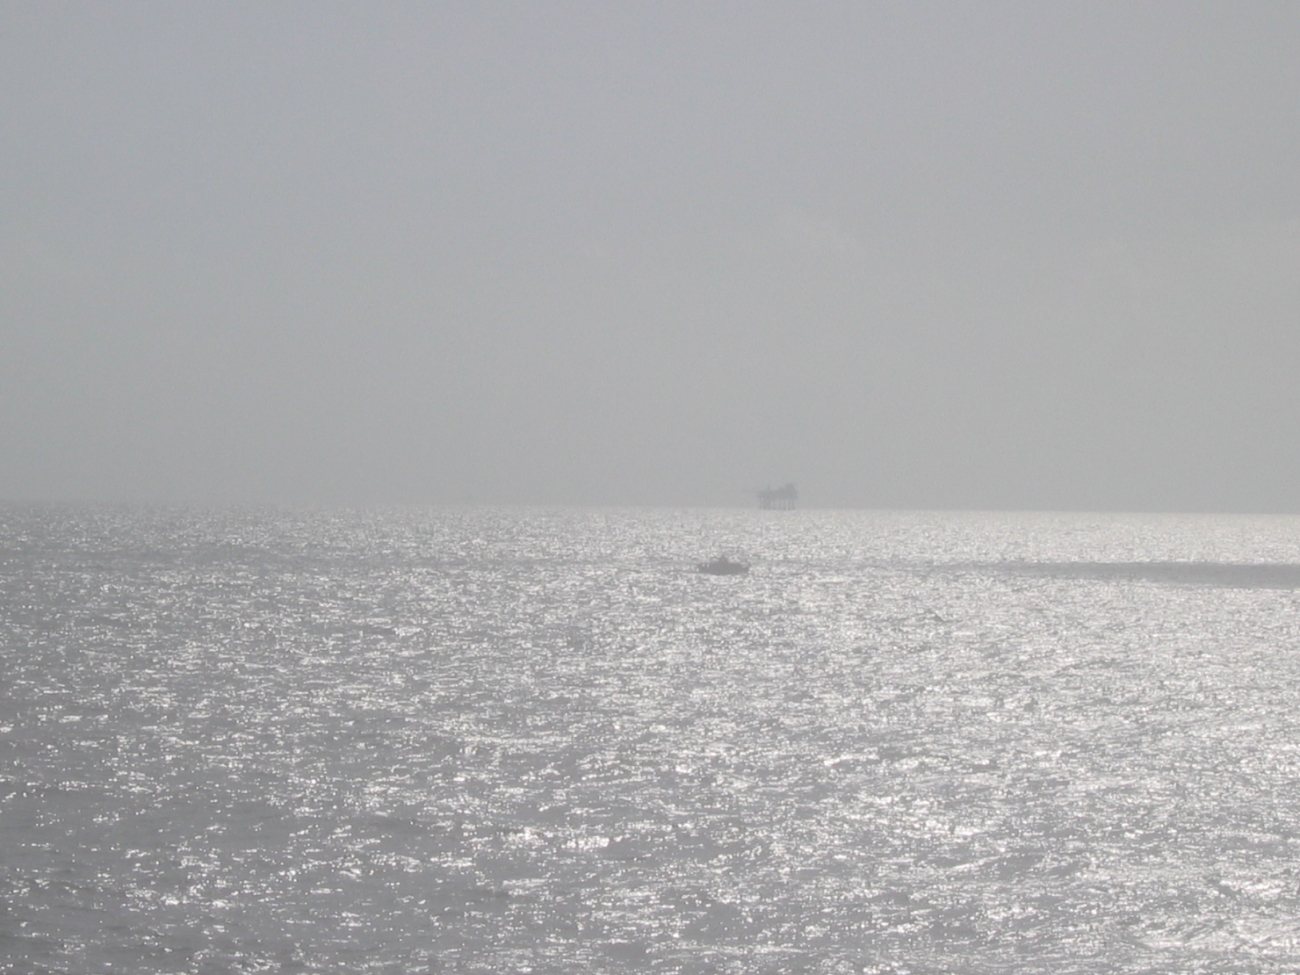 Survey launch and oil platform on a hazy day